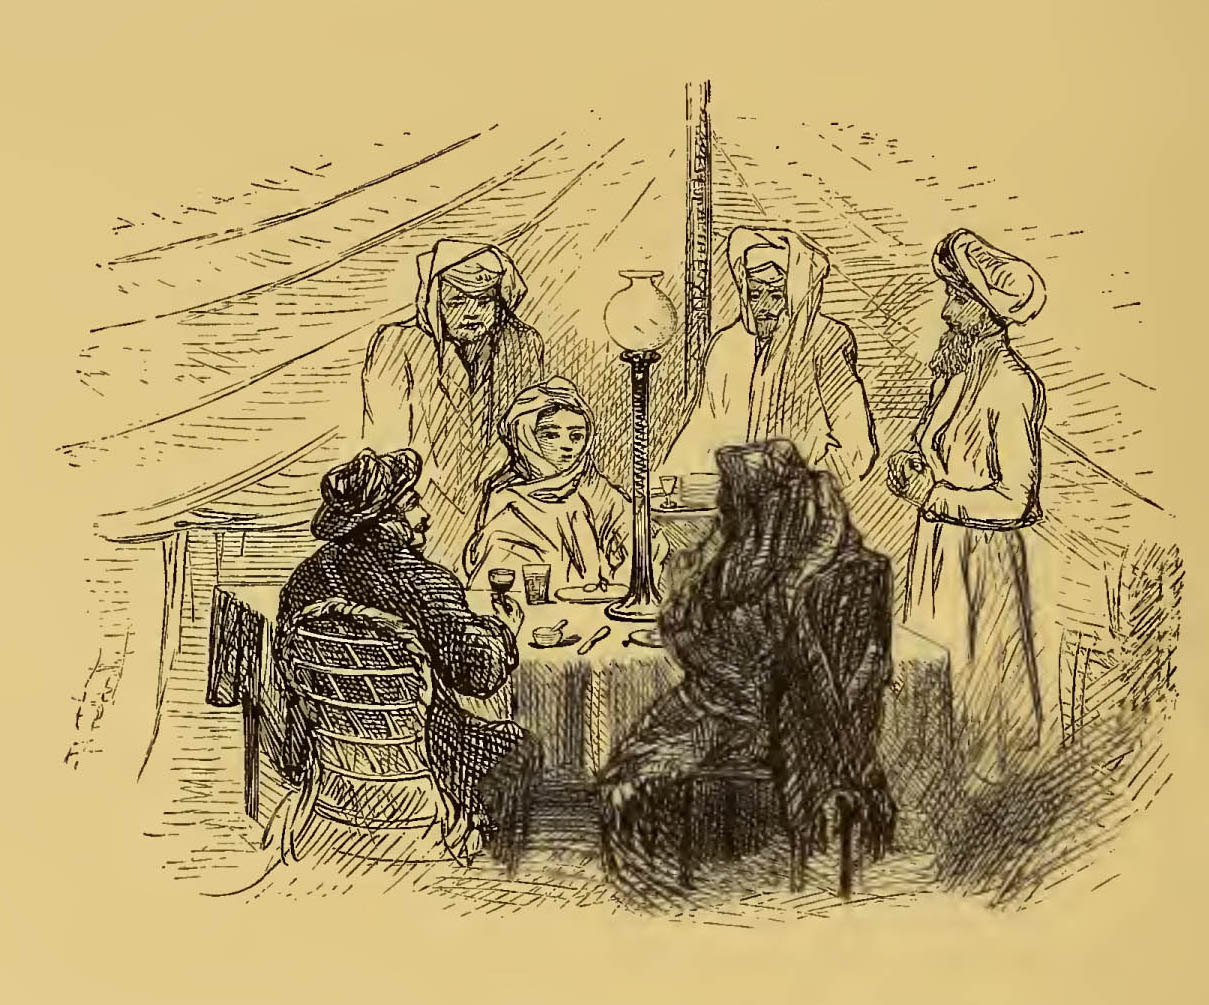 group dining at table in tent